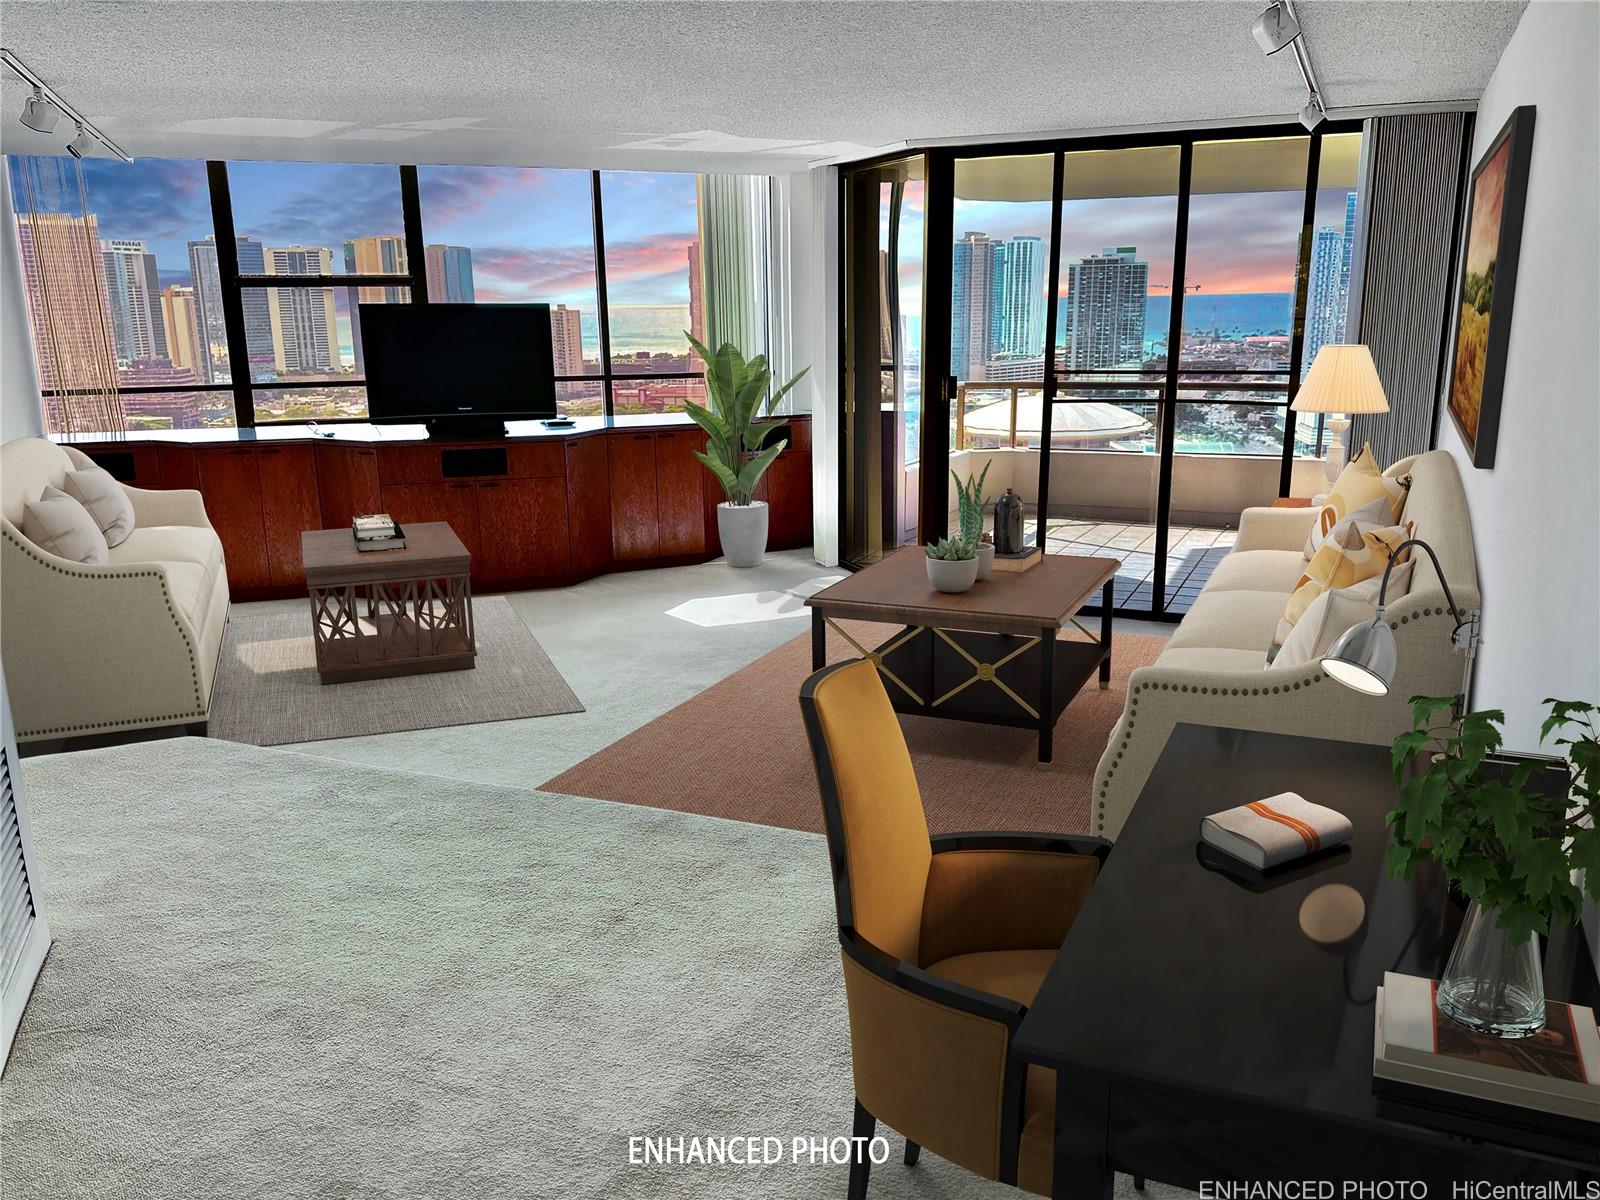 Sunken Living Room ENHANCED with Virtual New Paint, Carpet, and Sunset!   Endless possibilities... Bring your own Contractor & Interior Designer.